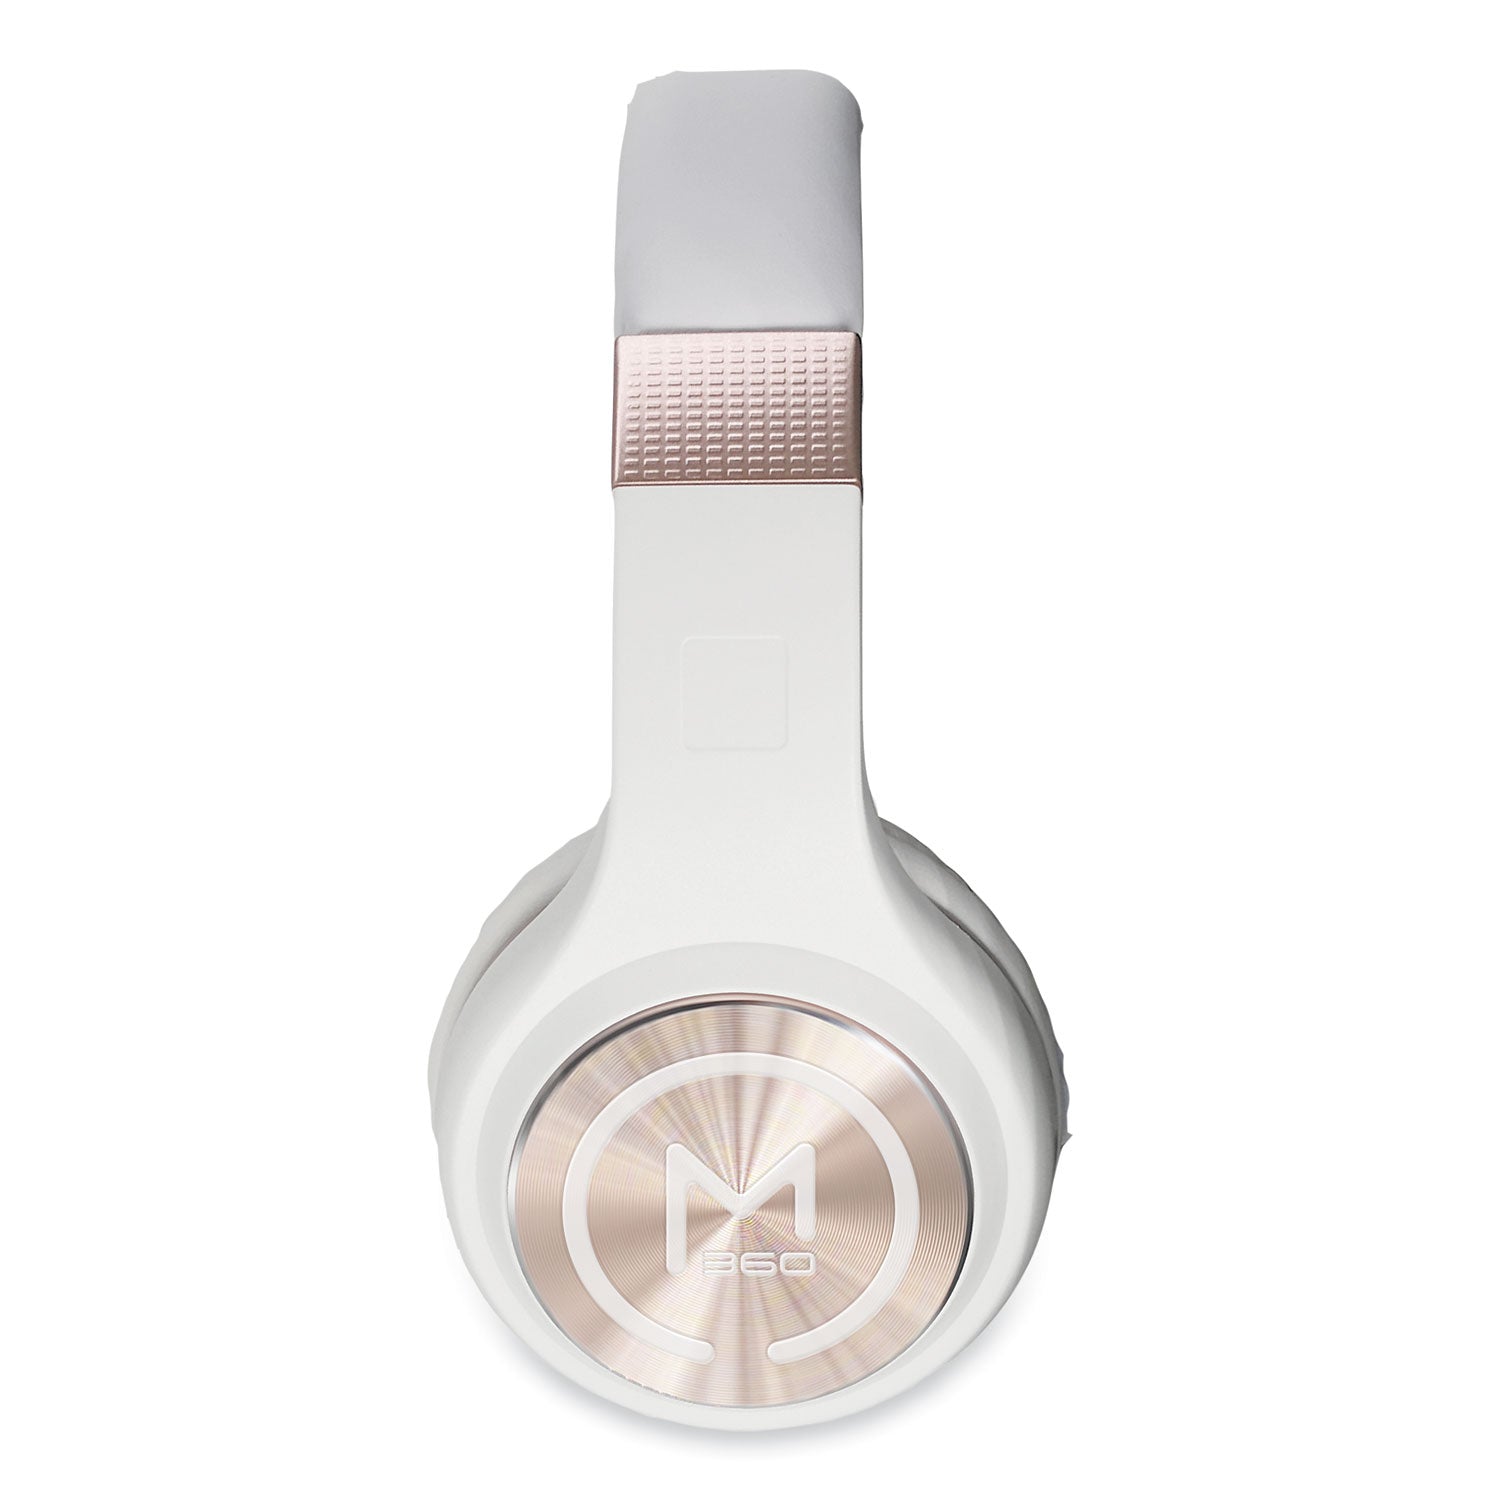 serenity-stereo-wireless-headphones-with-microphone-3-ft-cord-white-rose-gold_mhshp5500r - 3